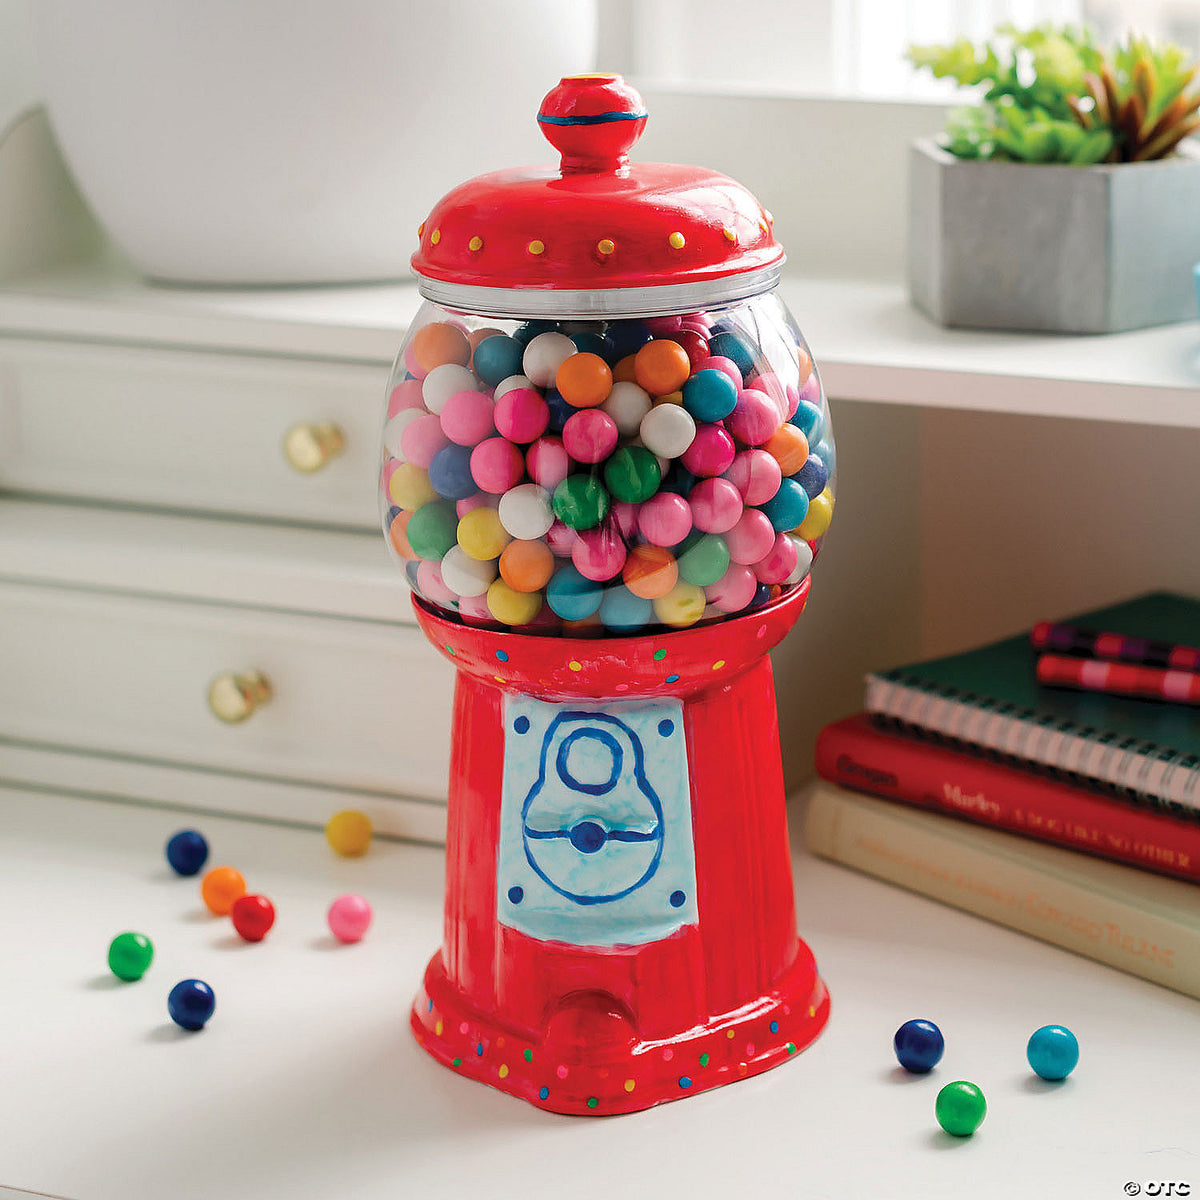 PYO Candy Jar Cover